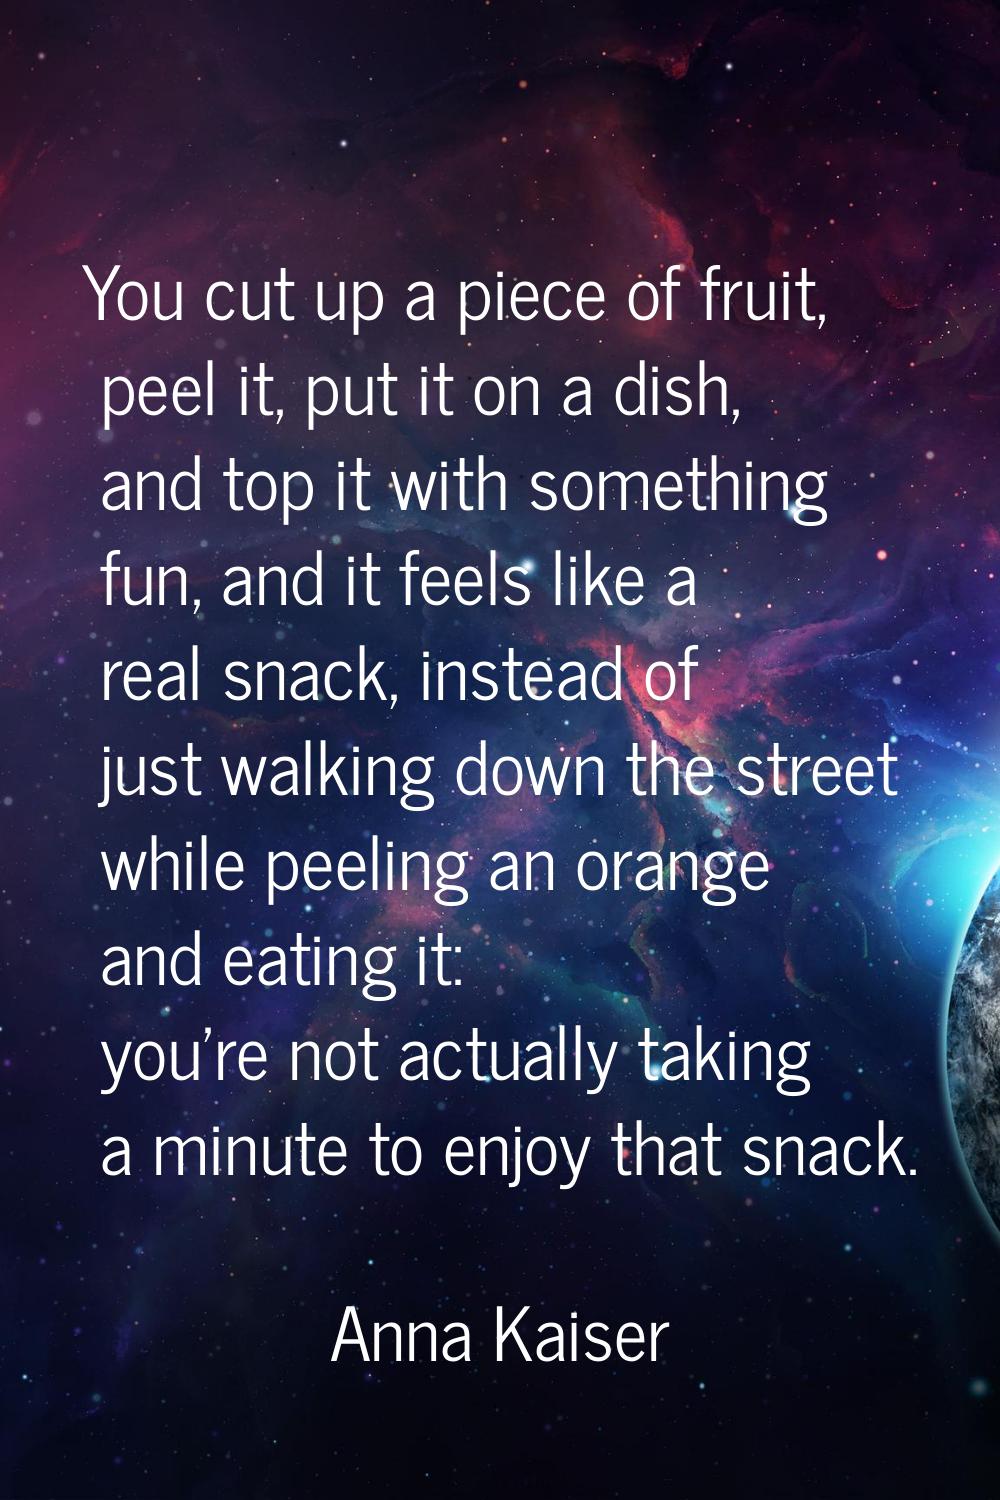 You cut up a piece of fruit, peel it, put it on a dish, and top it with something fun, and it feels